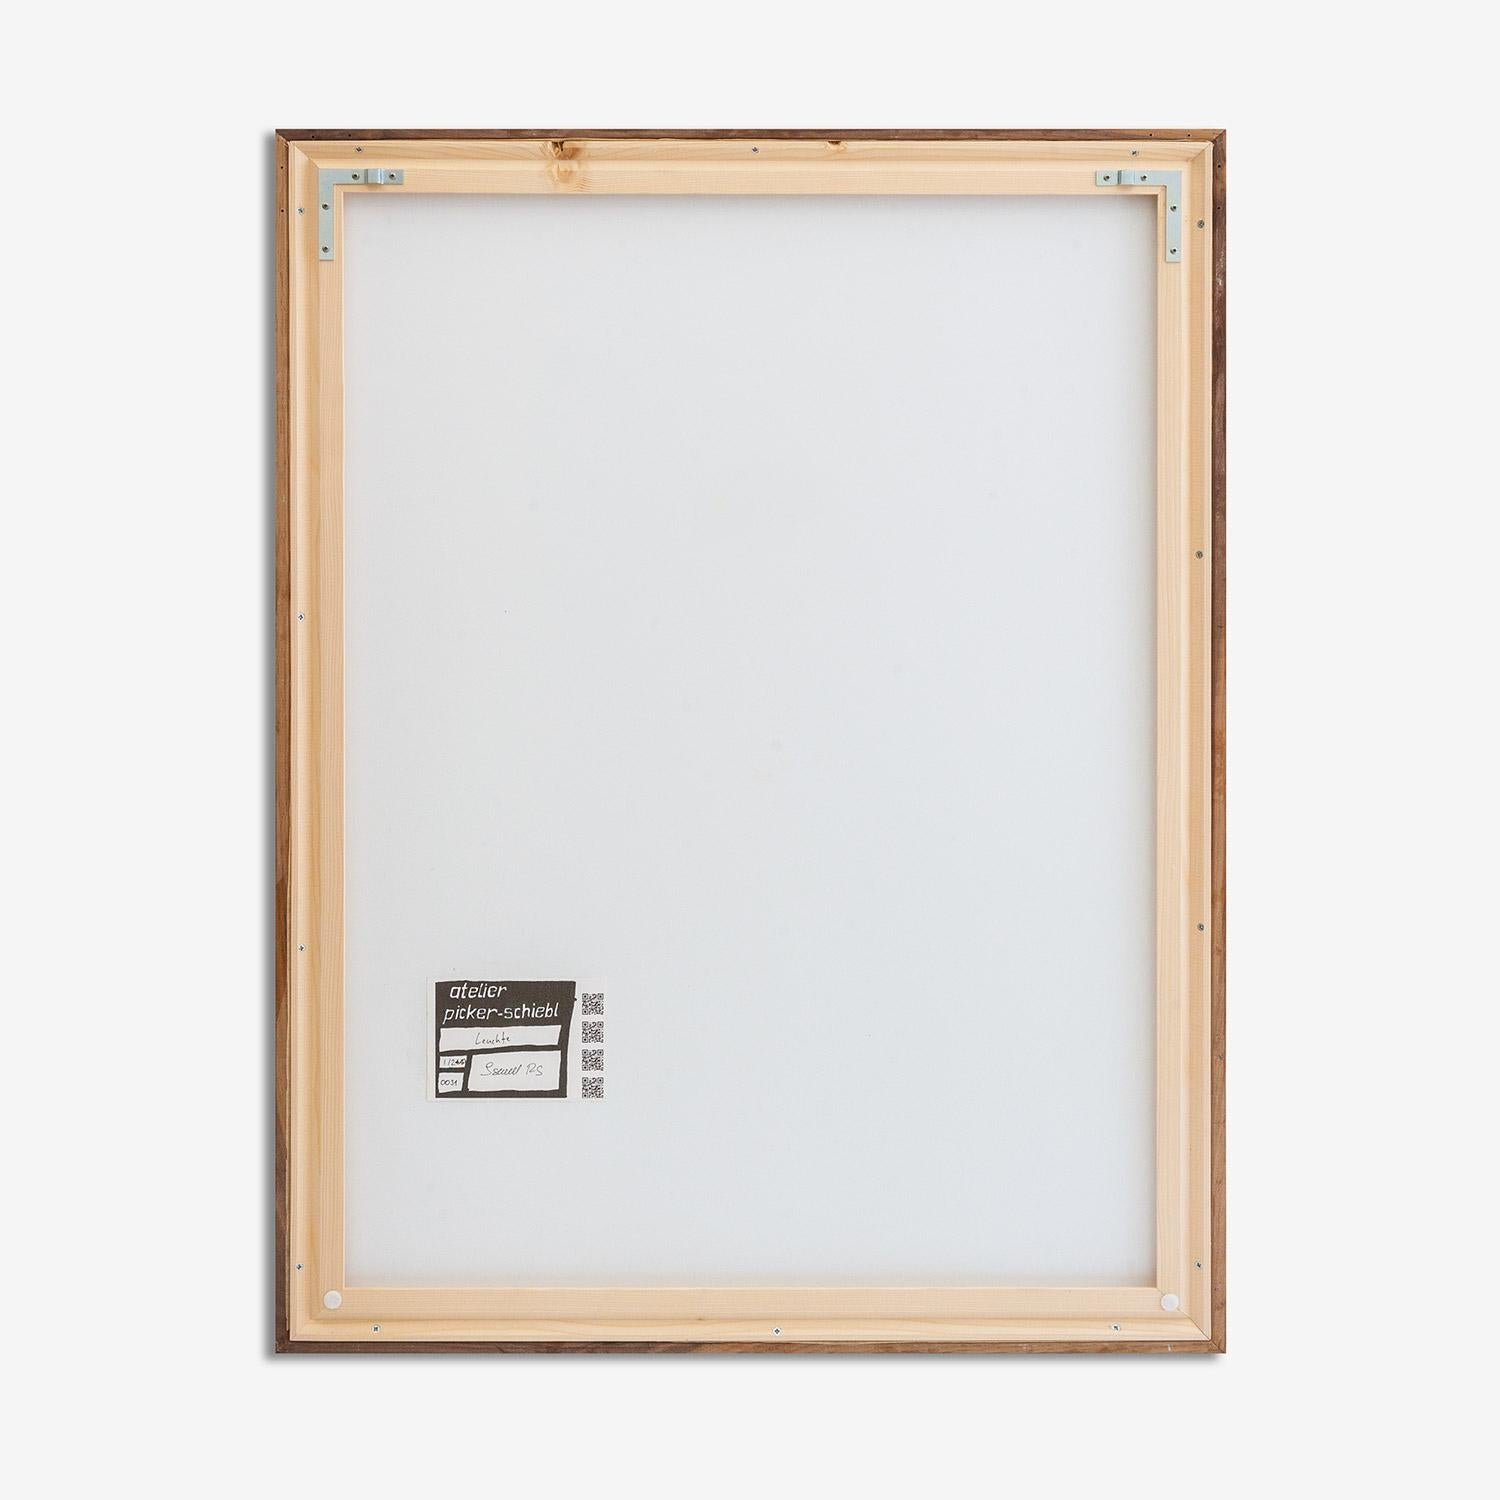 GELATIN SILVER PRINT ON BARYTA
Edition 1/2+Ap / 2022 - Printed and signed by artist.
Mounted on aluminum dibond, handmade walnut frame, natural, anti-reflection glass, UV 70, metal corners for wall mounting.


Ismael Picker-Schiebel
1989 lives and